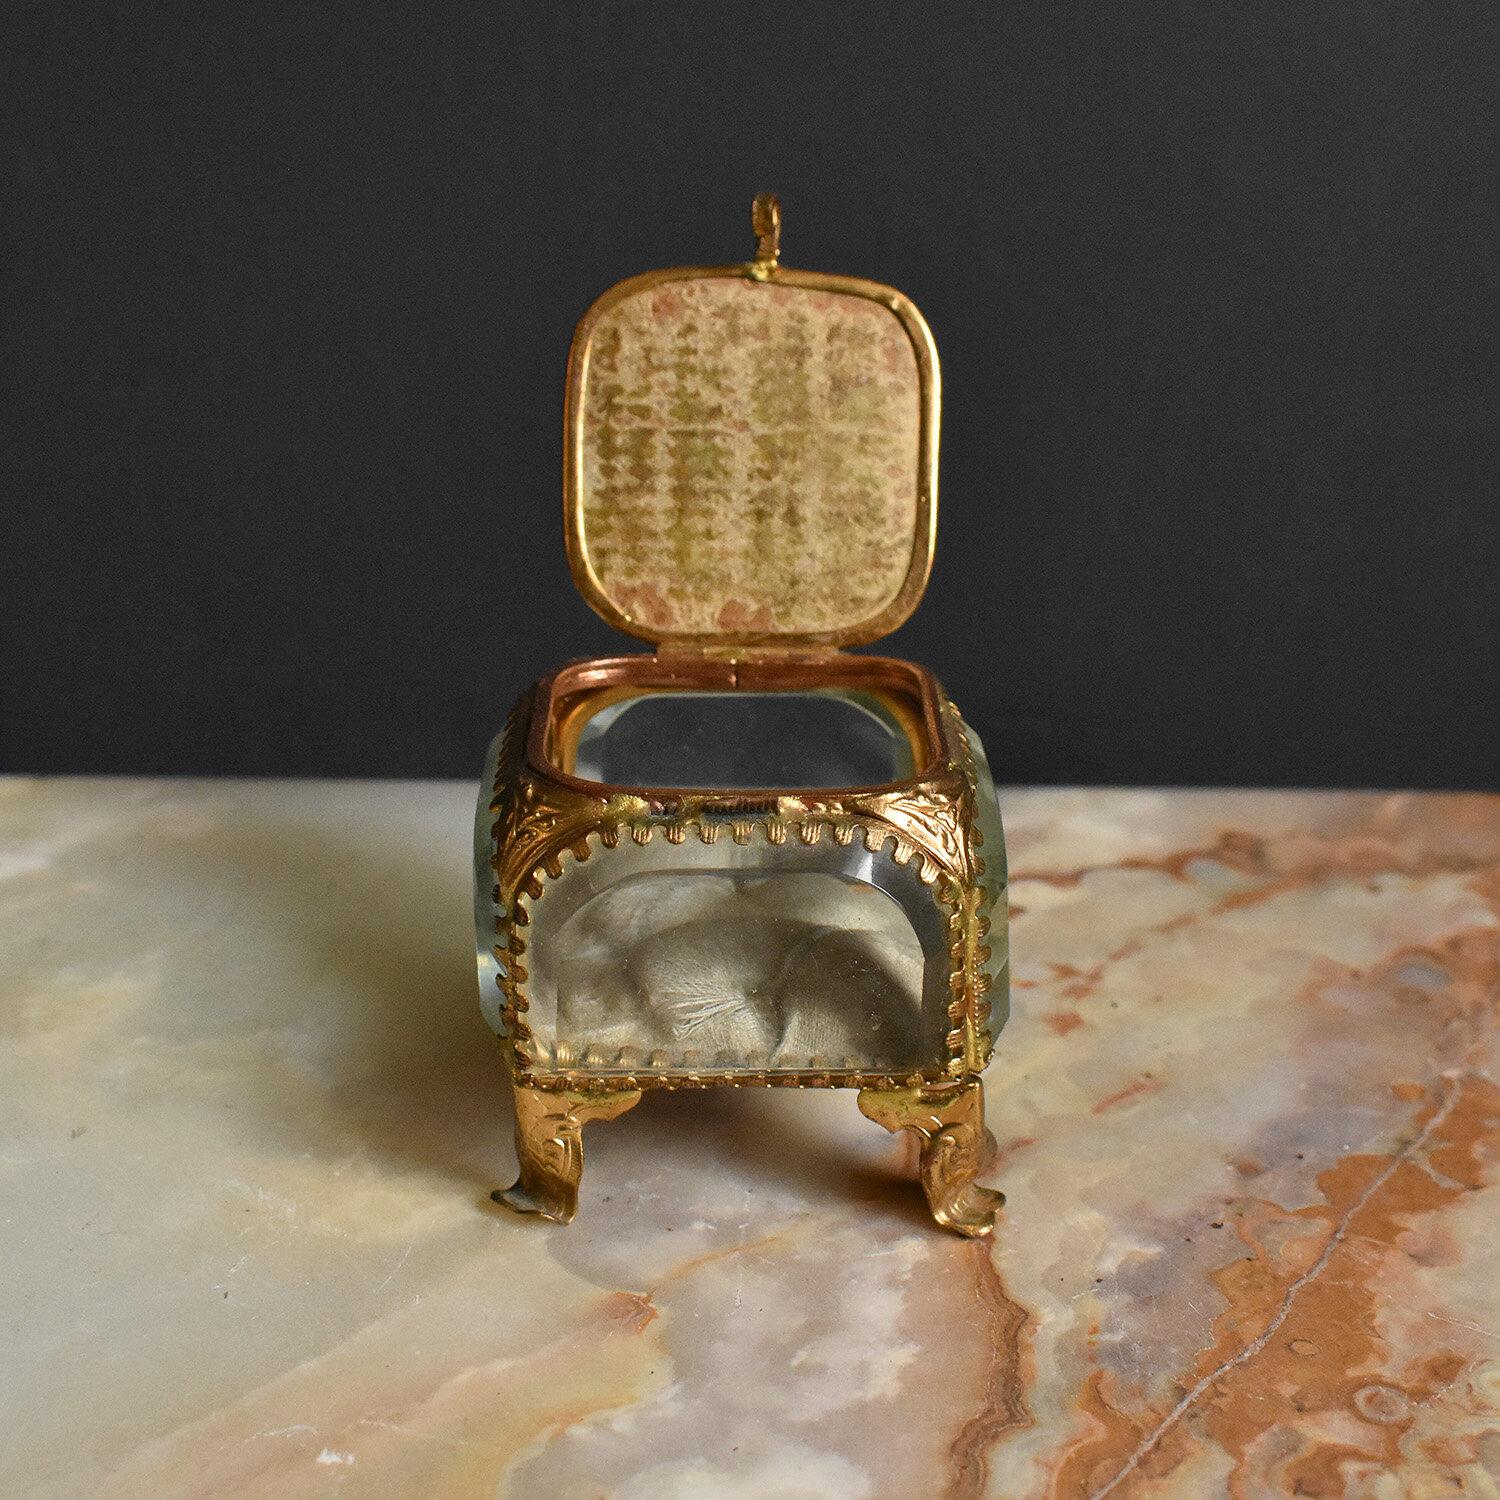 Antique French Gilt Brass and Cut Glass Souvenir Jewellery Casket, 19th Century For Sale 3